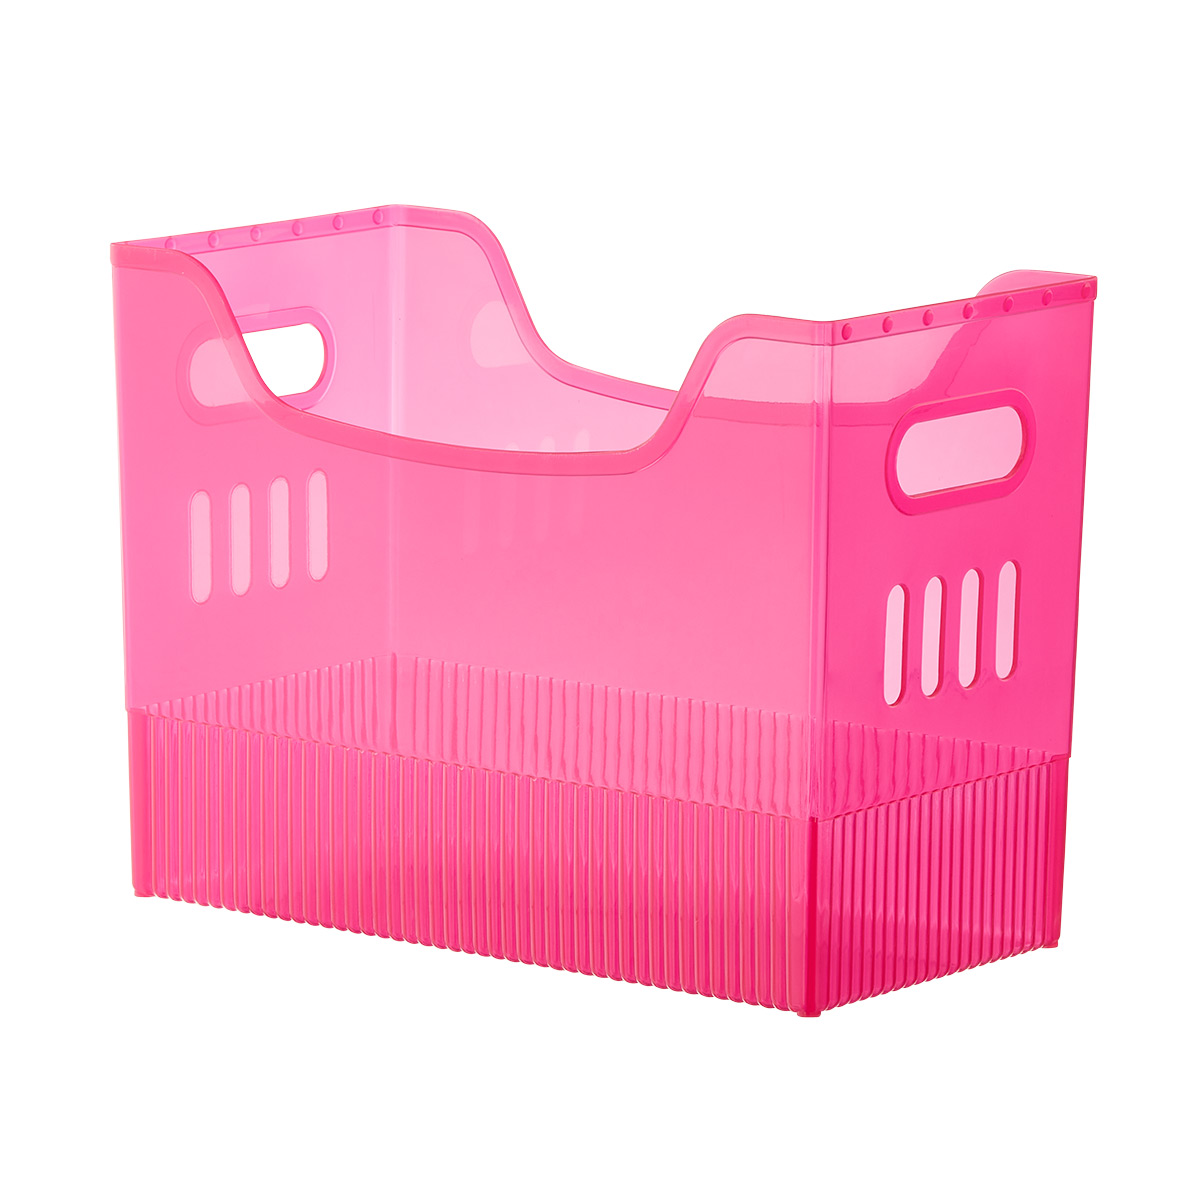 https://www.containerstore.com/catalogimages/444691/10087988_The_Container_Store_Large-M.jpg